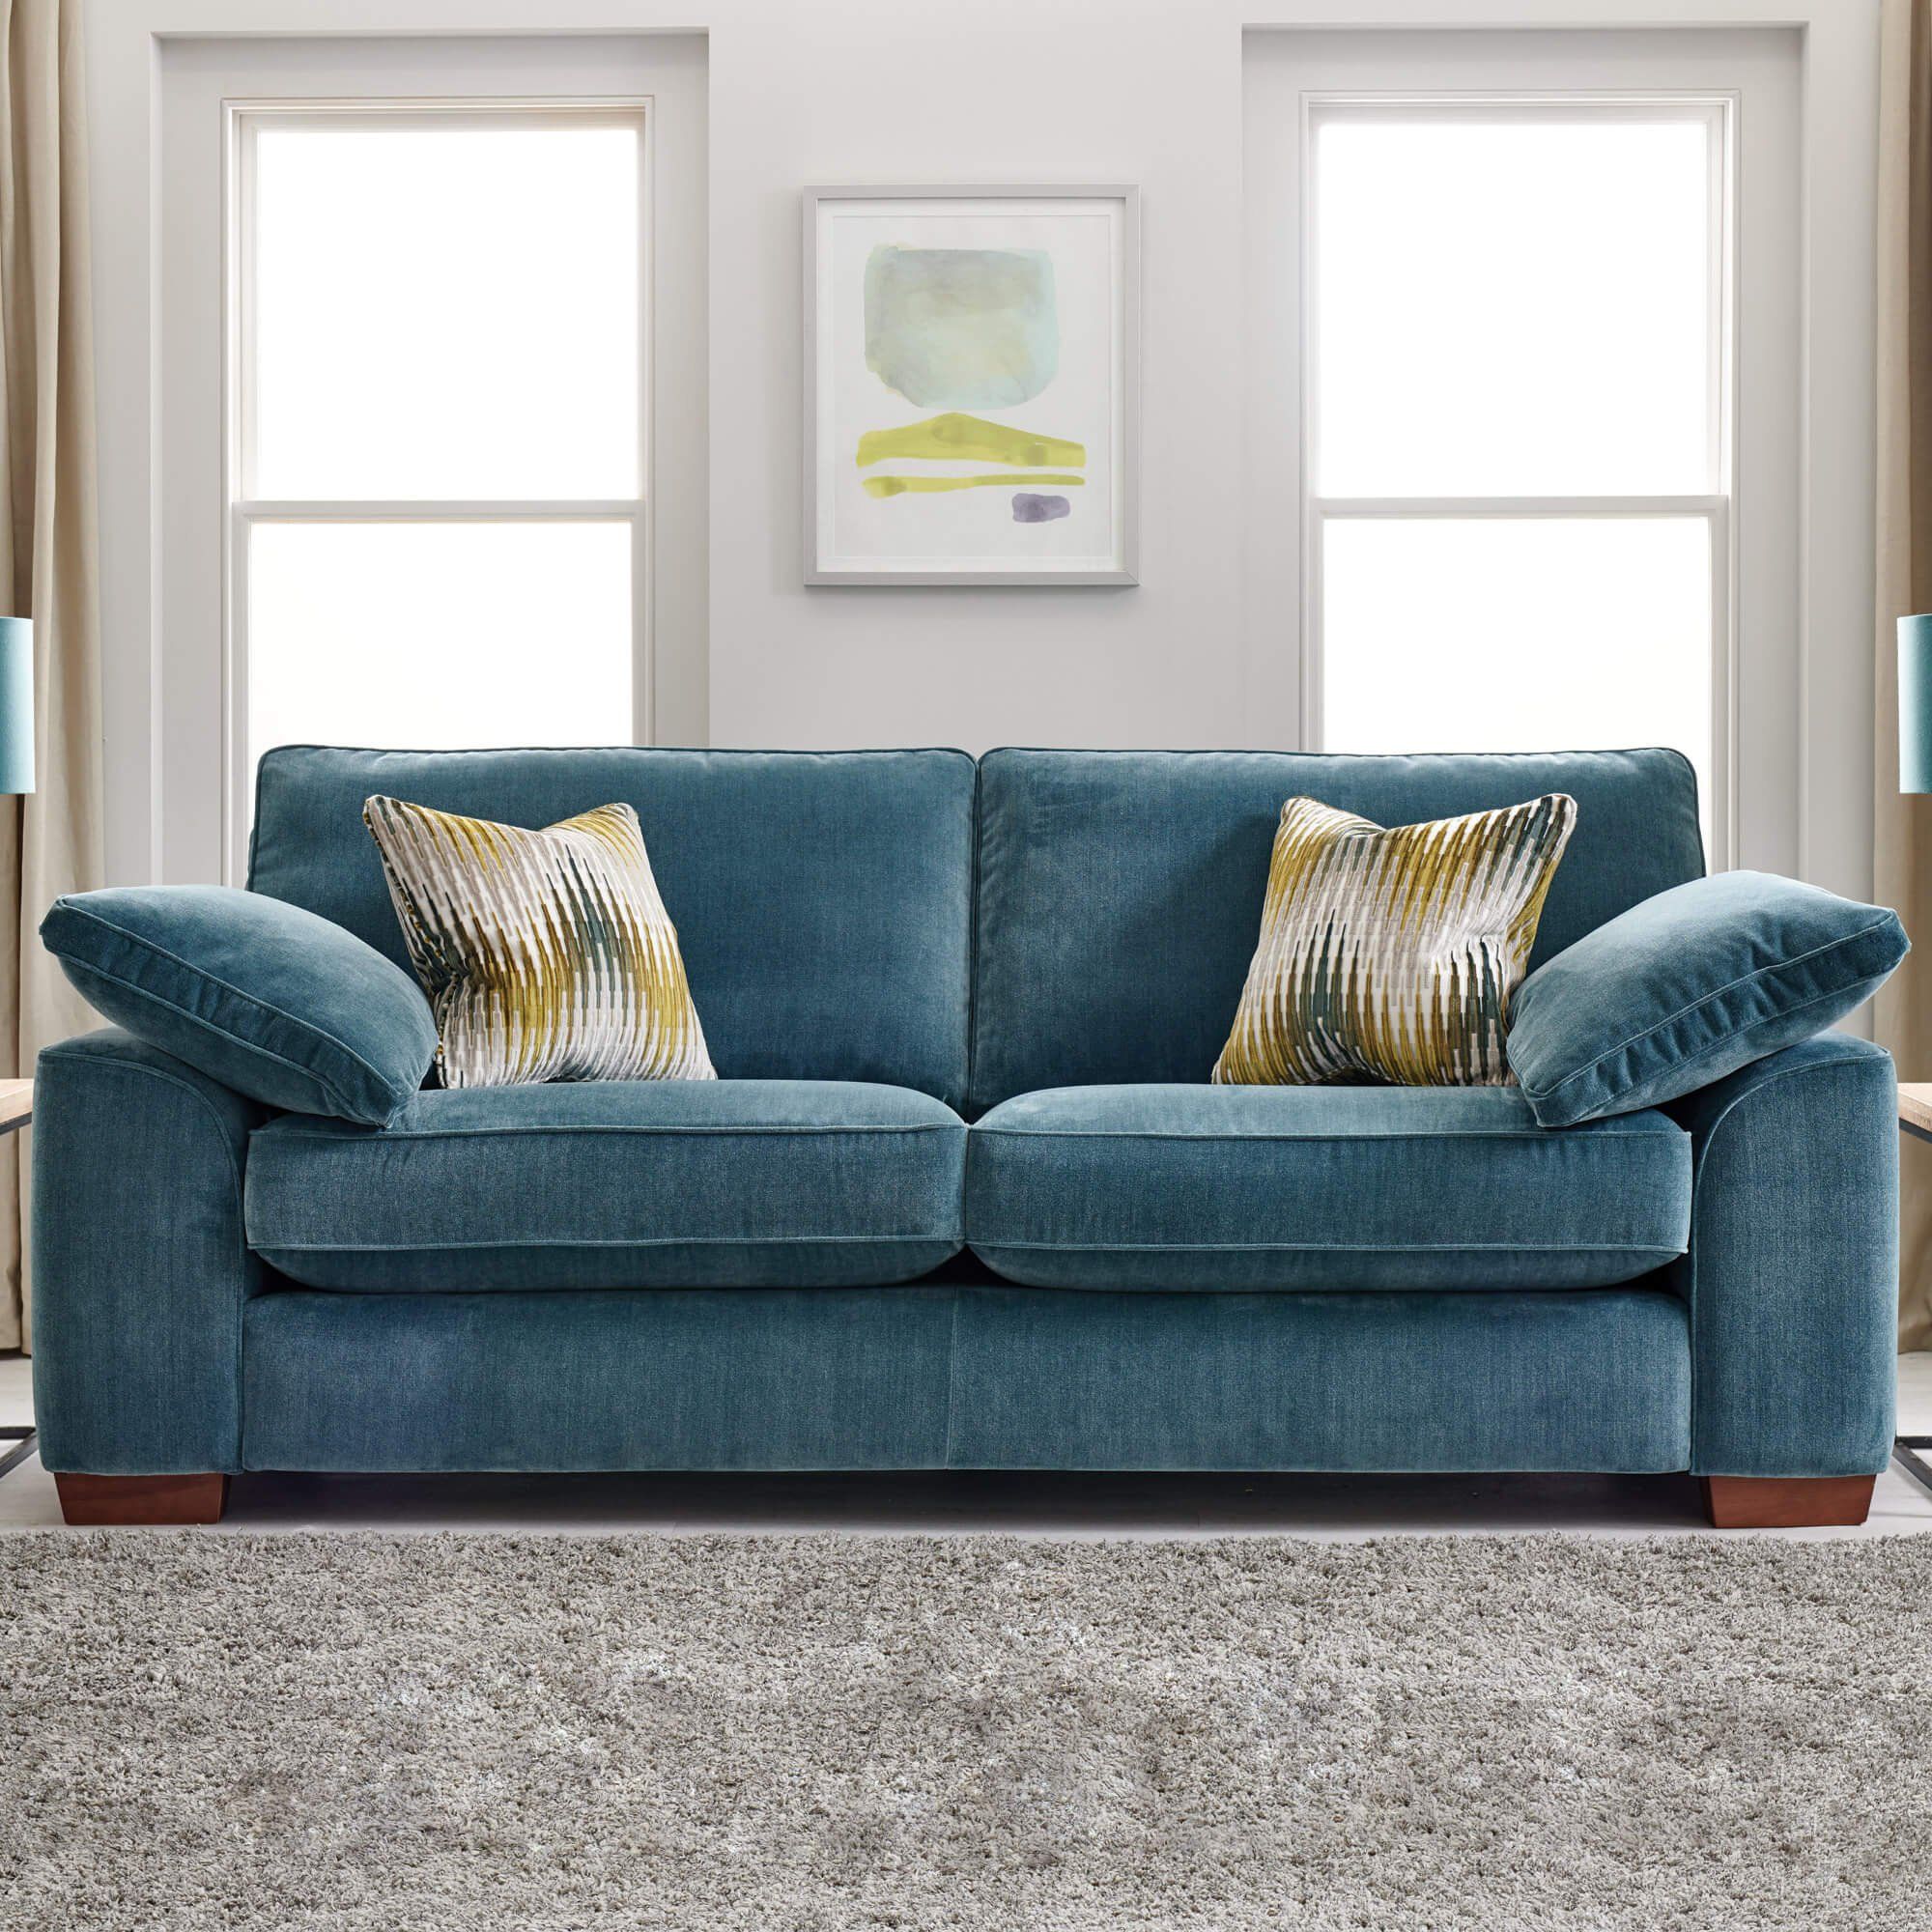 Leandra Hydro Blue Fabric 3 Seater Sofa Throughout Sofas In Blue (View 3 of 15)